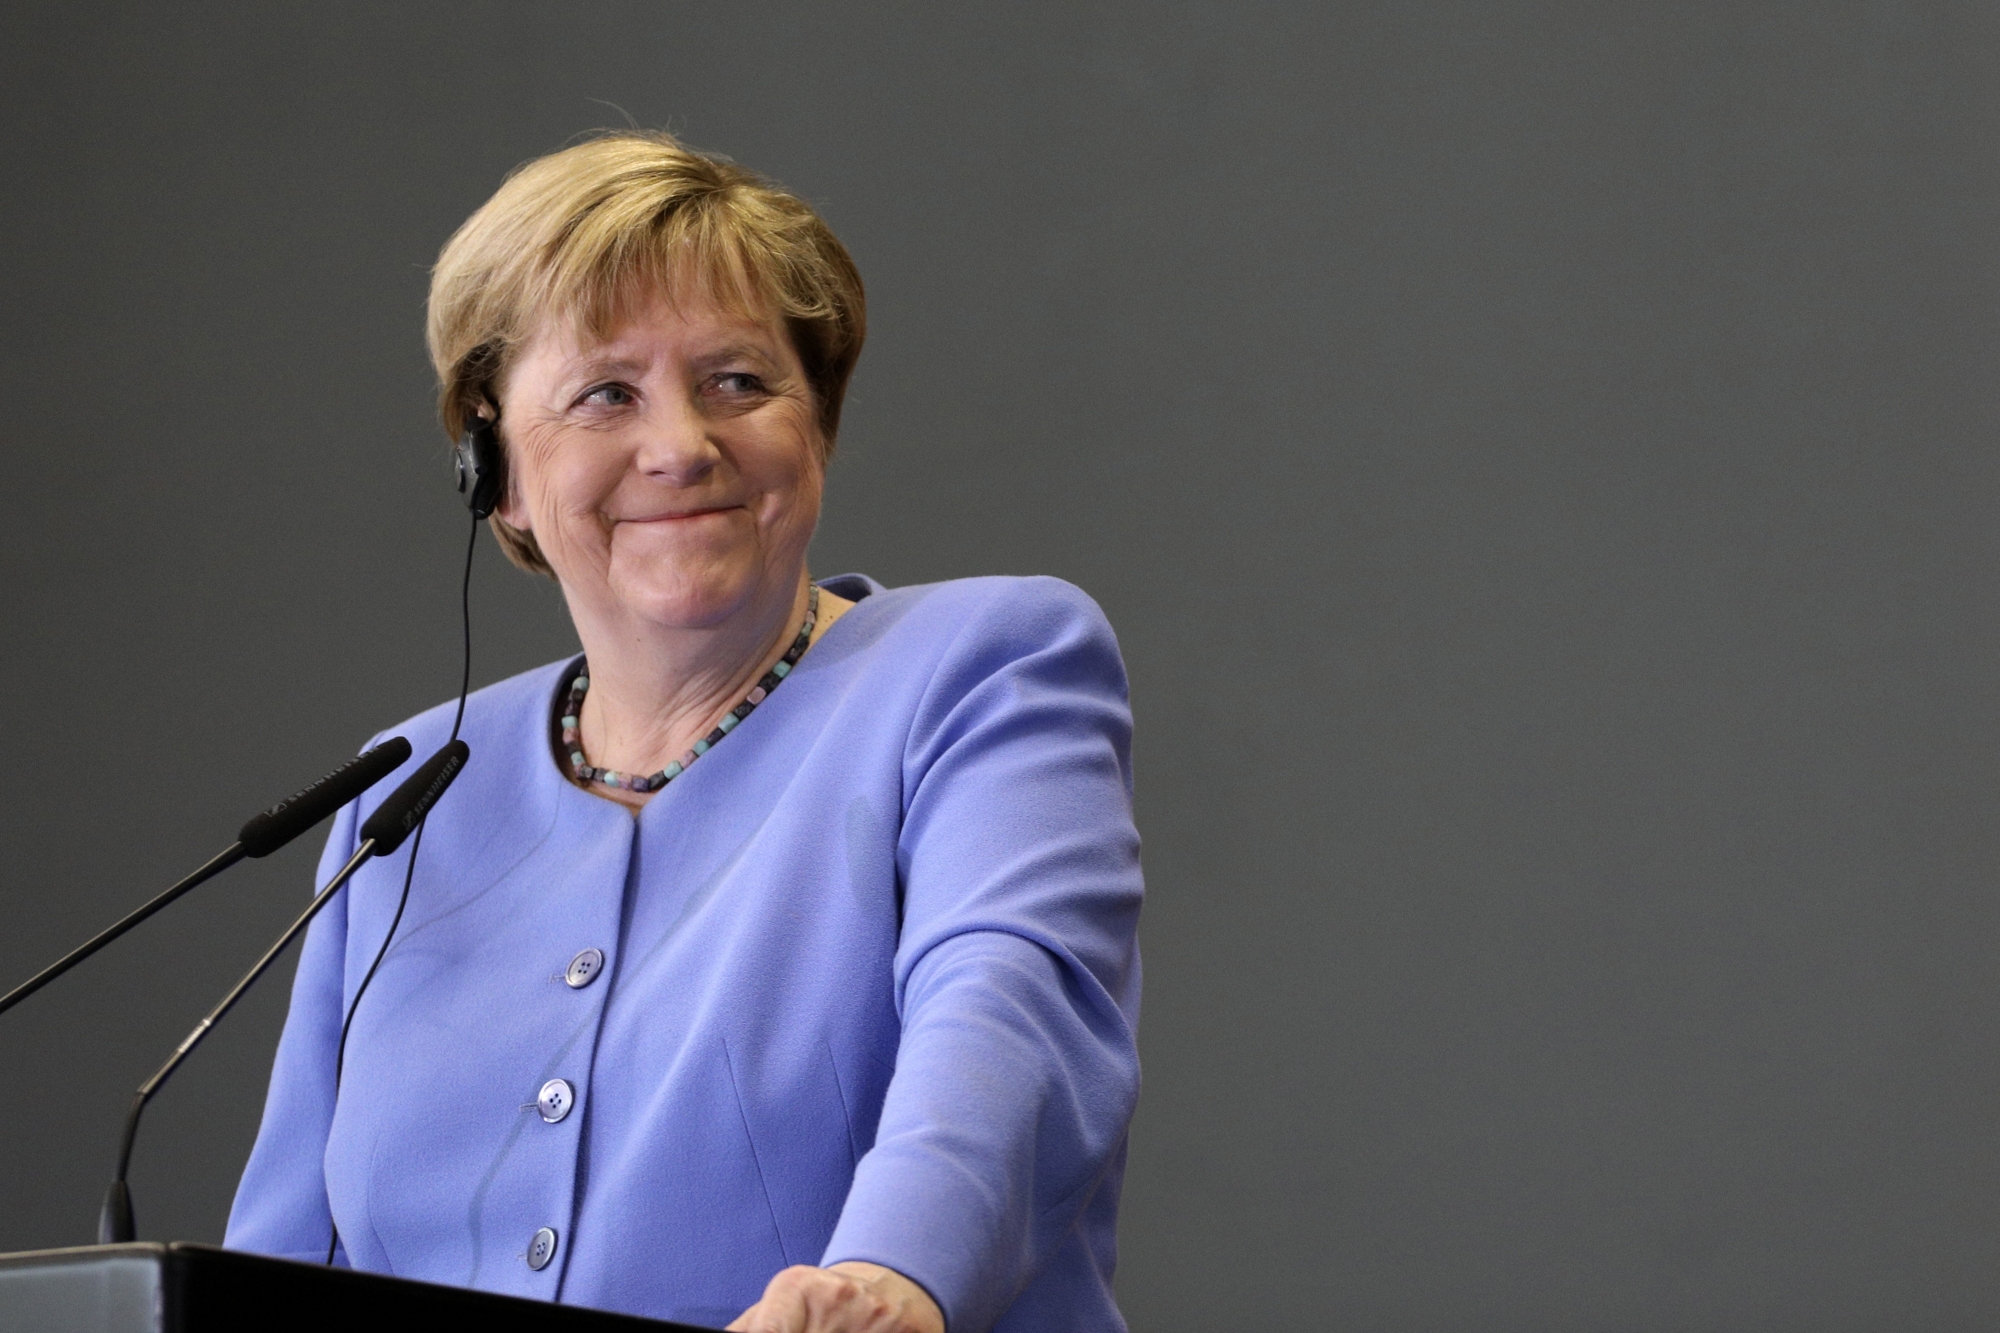 German Chancellor Angela Merkel smiles during a news conference with the Albanian Prime Minister Edi Rama in Tirana, Albania, Tuesday, Sept. 14, 2021. Merkel is on a farewell tour of the Western Balkans, as she announced in 2018 that she wouldn't seek a fifth term as Germany's Chancellor. (AP Photo/Franc Zhurda)